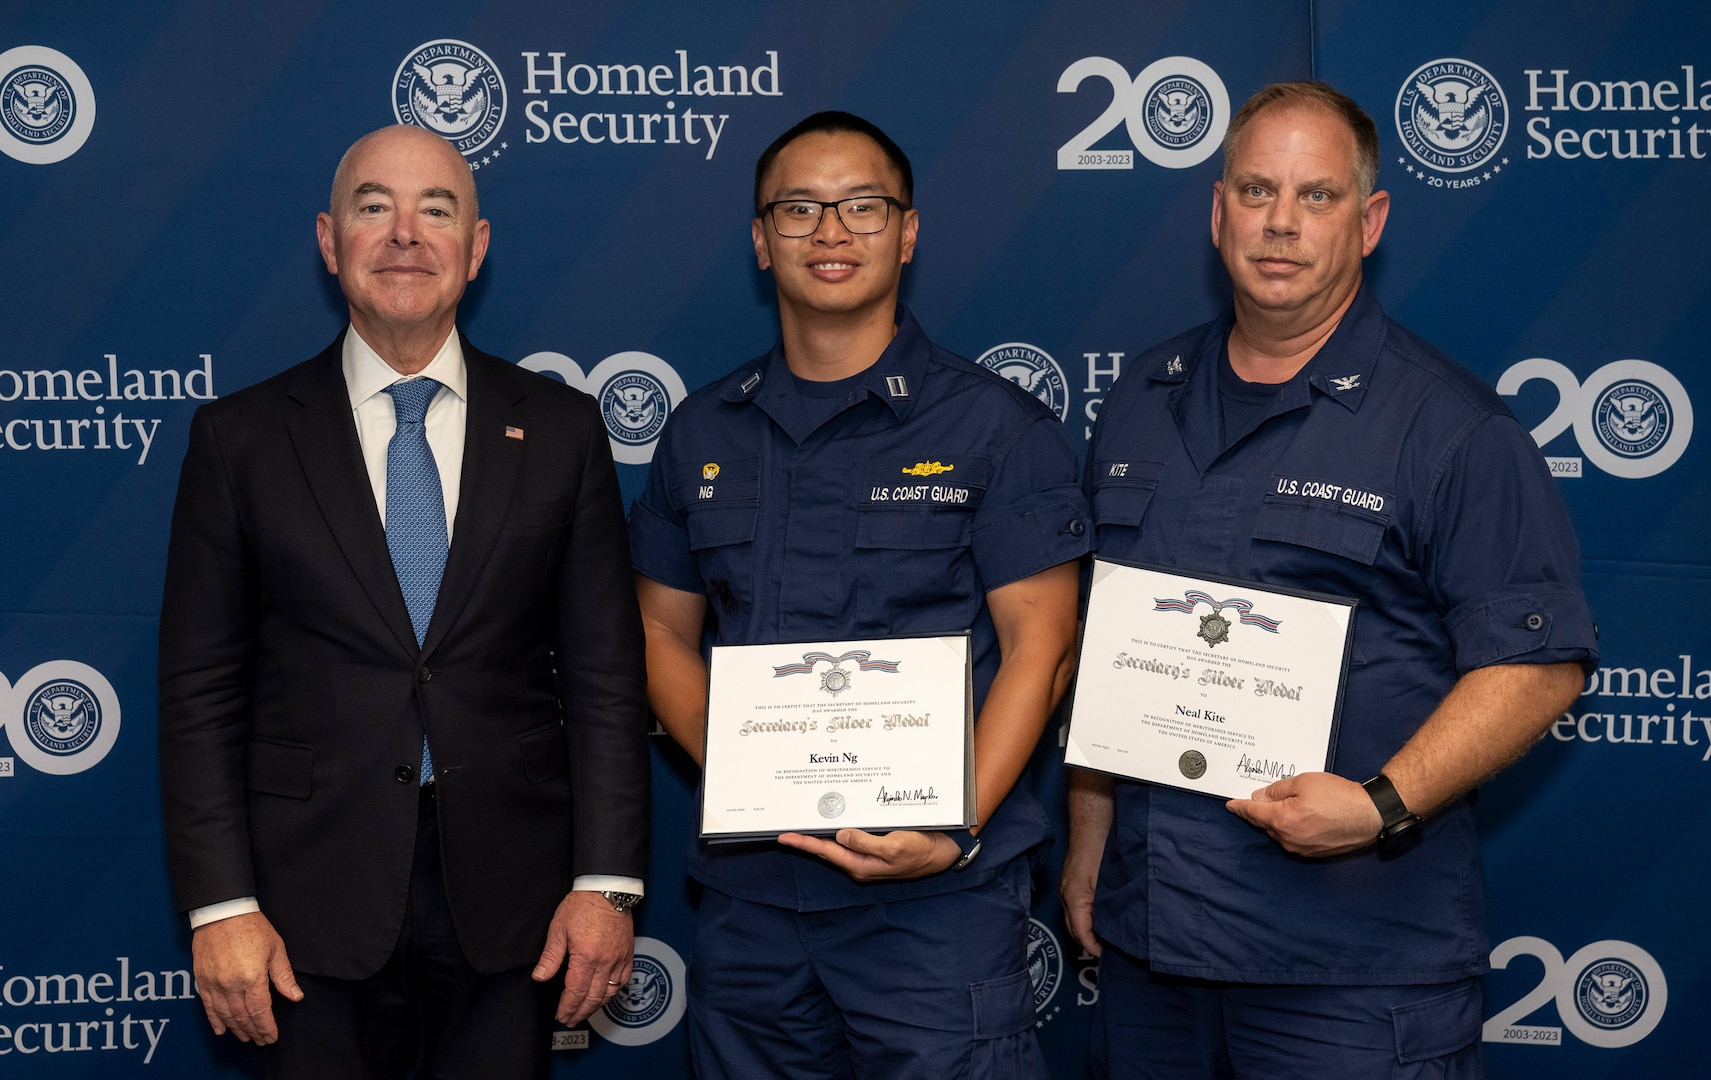 Homeland Security Secretary Alejandro Mayorkas presents the 2023 Secretary’s Awards to DHS employees at the FEMA Resource Center in Sacramento, California. This year DHS is recognizing 1,341 recipients of the 2023 Secretary’s Awards. (Photo by Tia Dufour/Released)